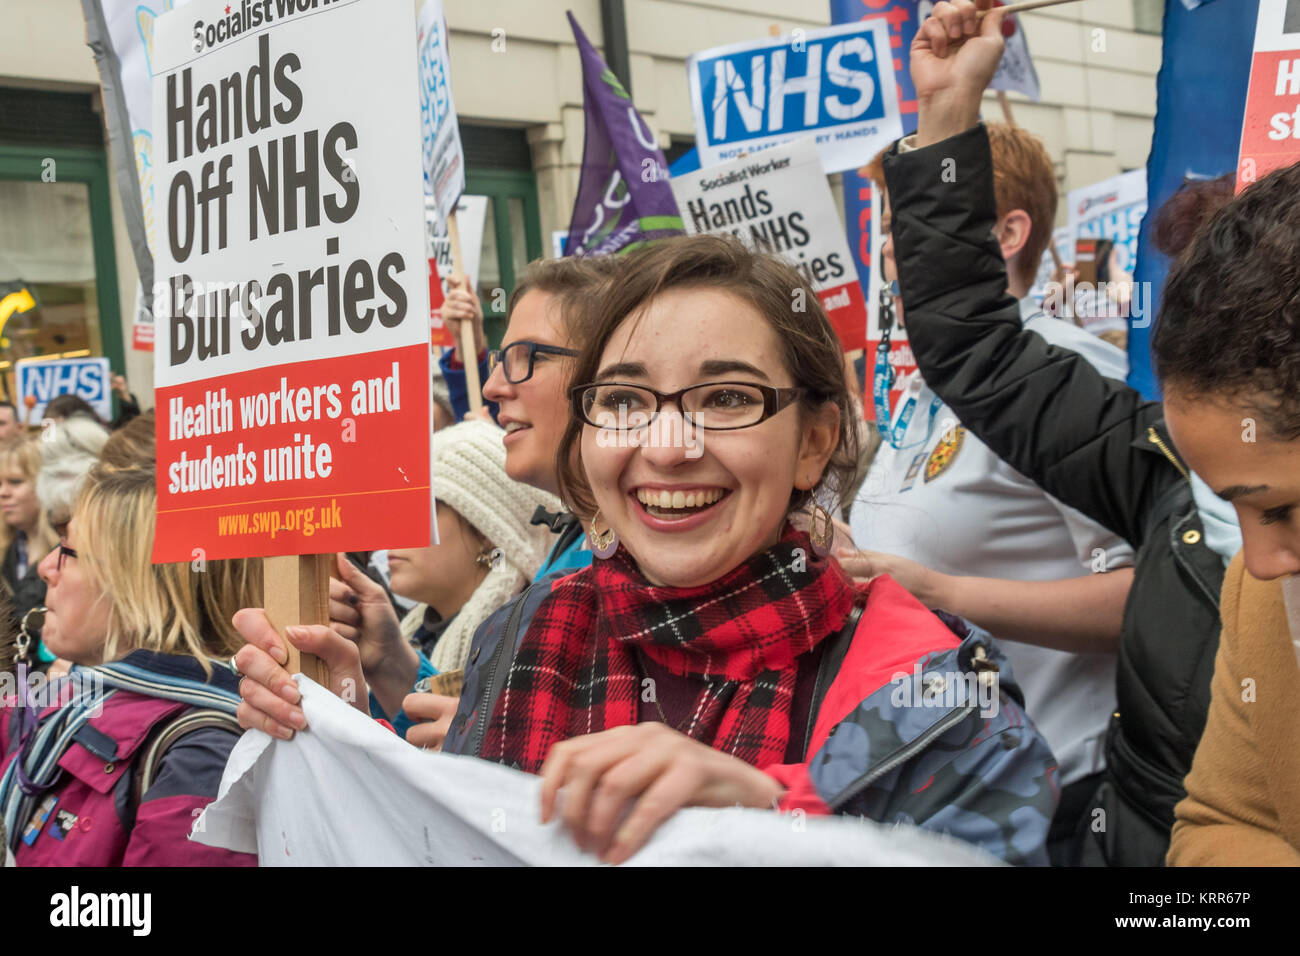 A woman holds a placard 'Hands Off NHS bursaries' before the march to save NHS Student Bursaries. Stock Photo